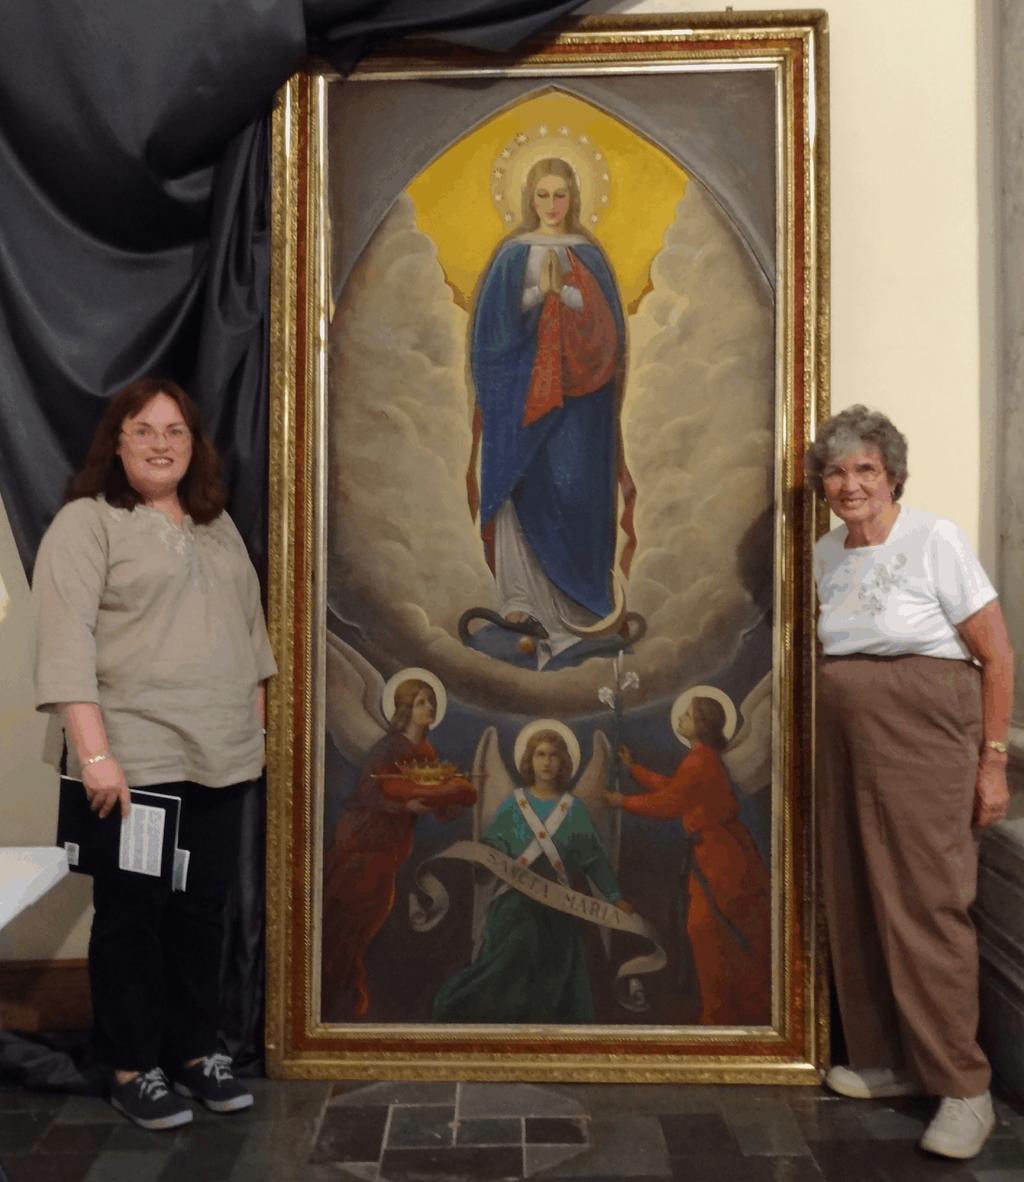 The Save Our Steeples group hopes to obtain a grant to restore the painting of St. Mary. It was stored for many years on a back porch of the convent in Pittsburgh.